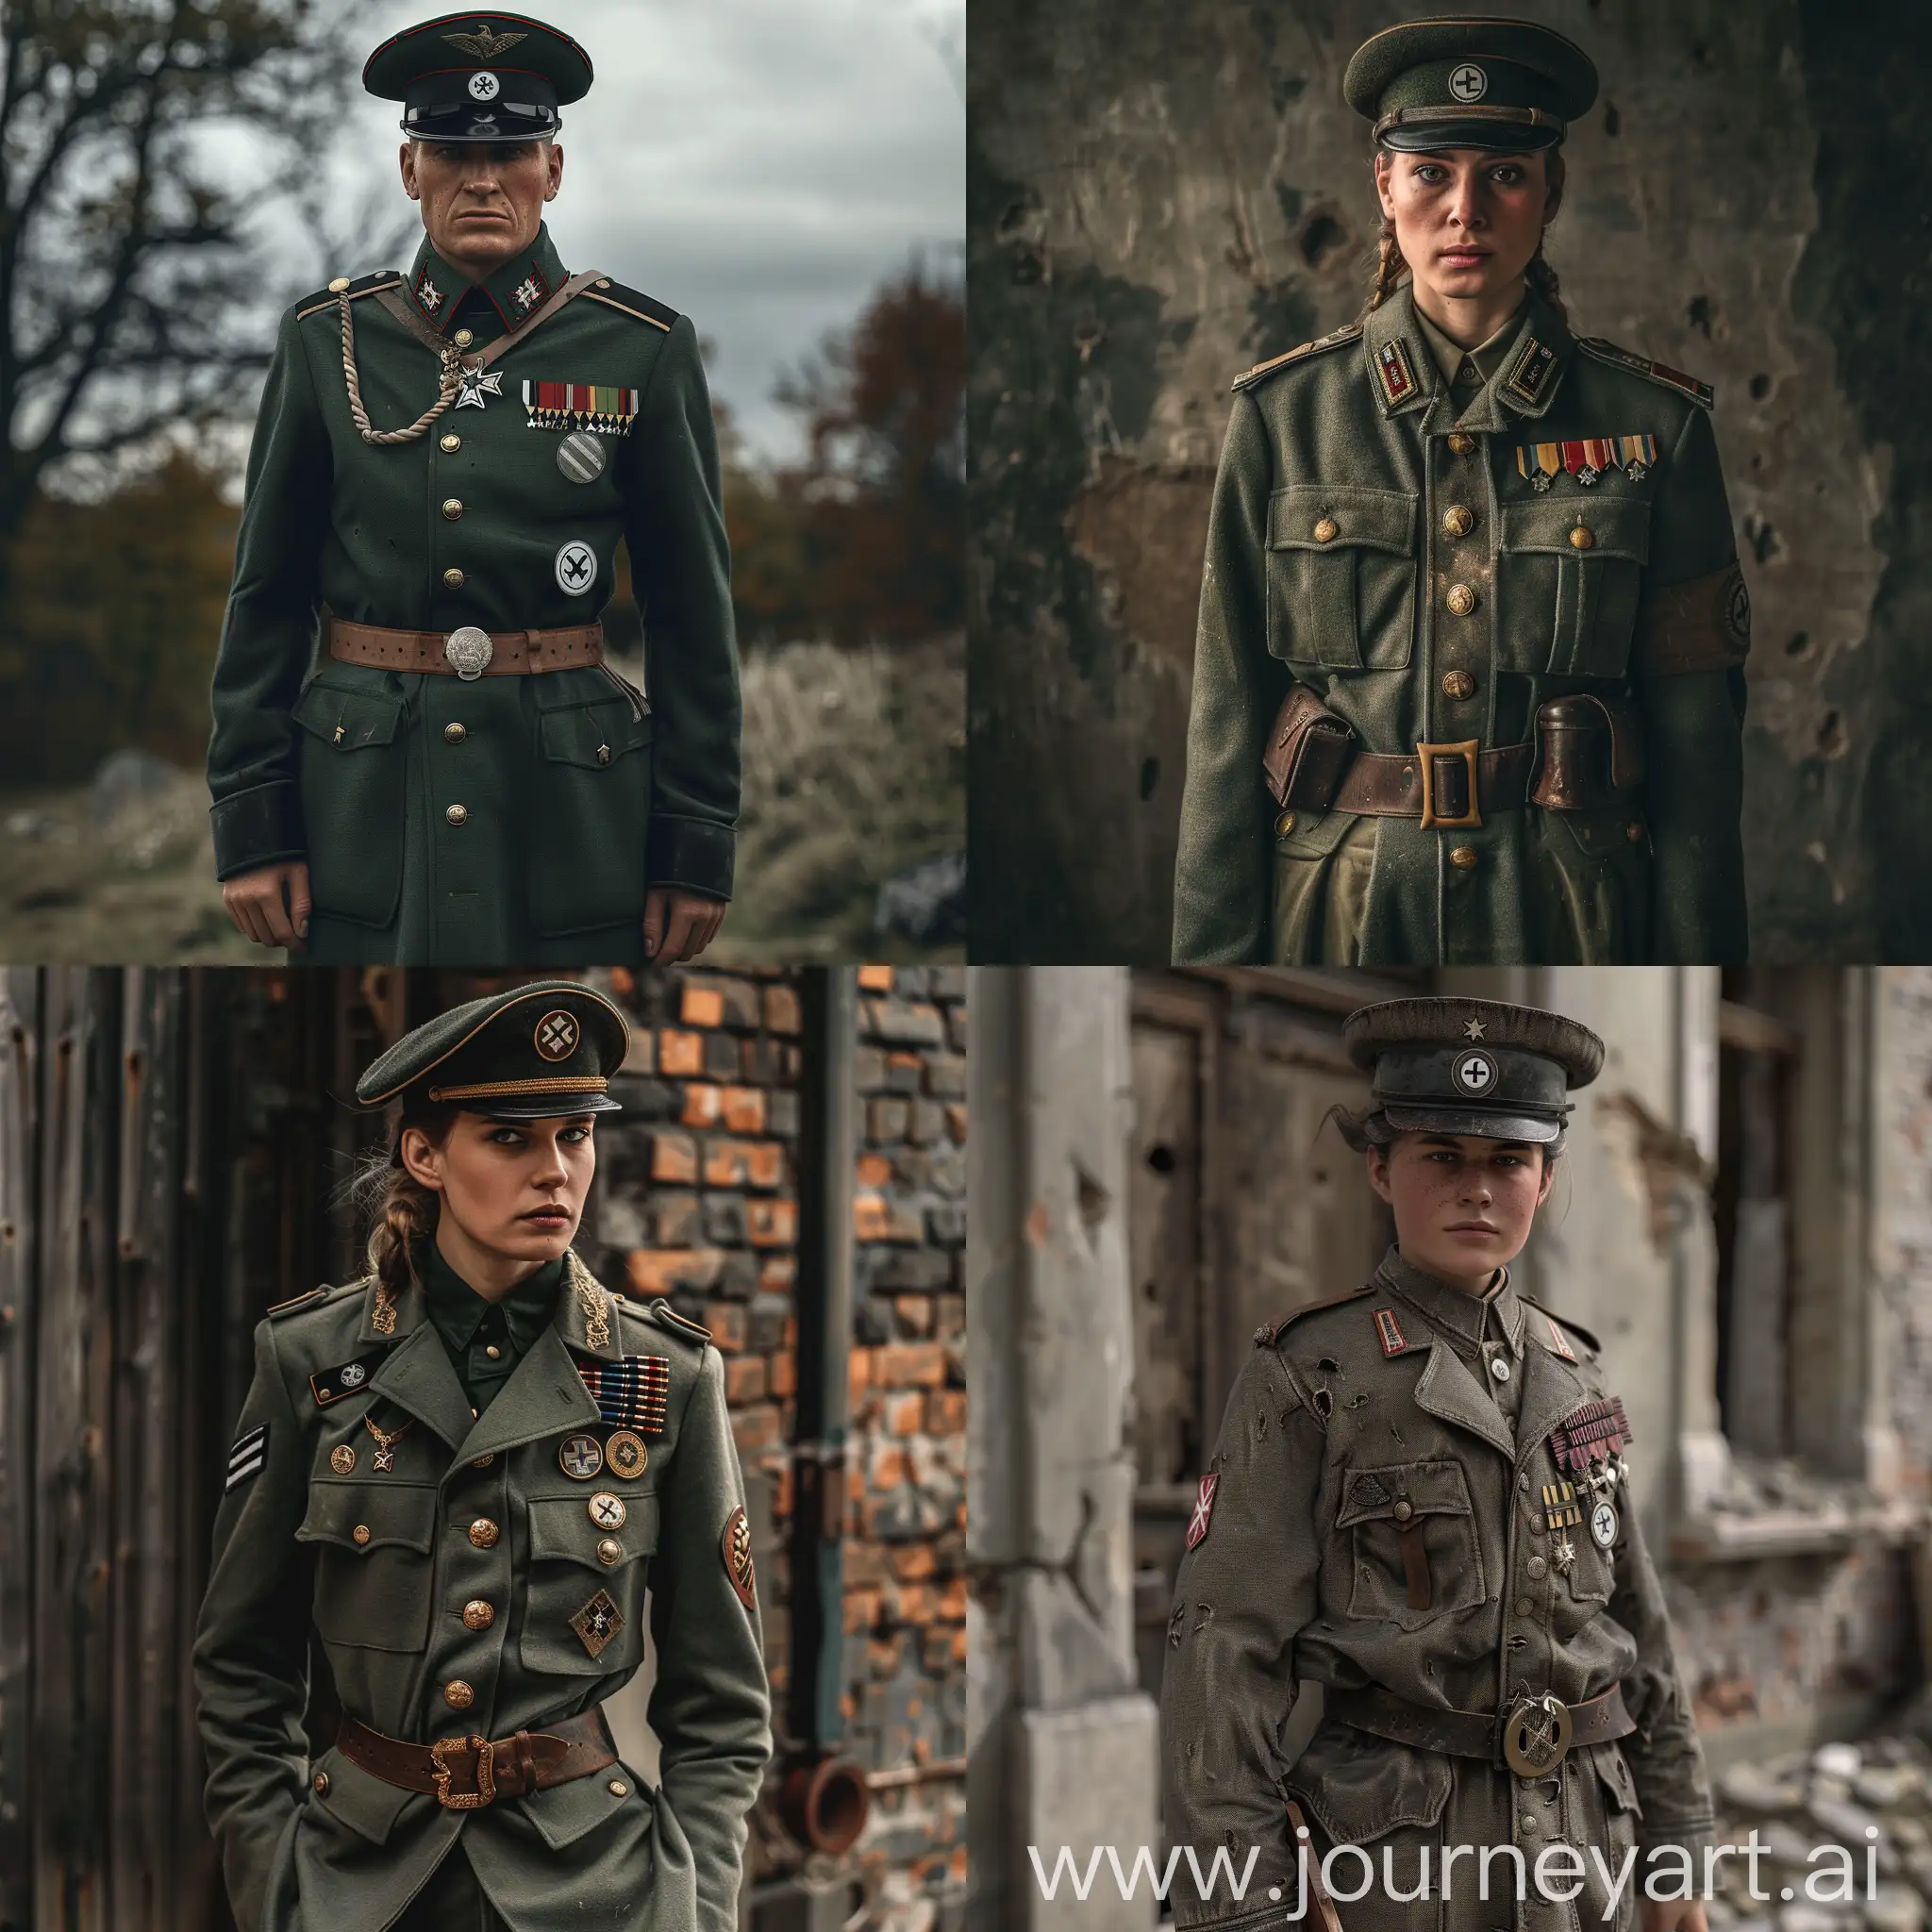 German-World-War-II-Military-Uniform-Portrait-with-Accurate-Details